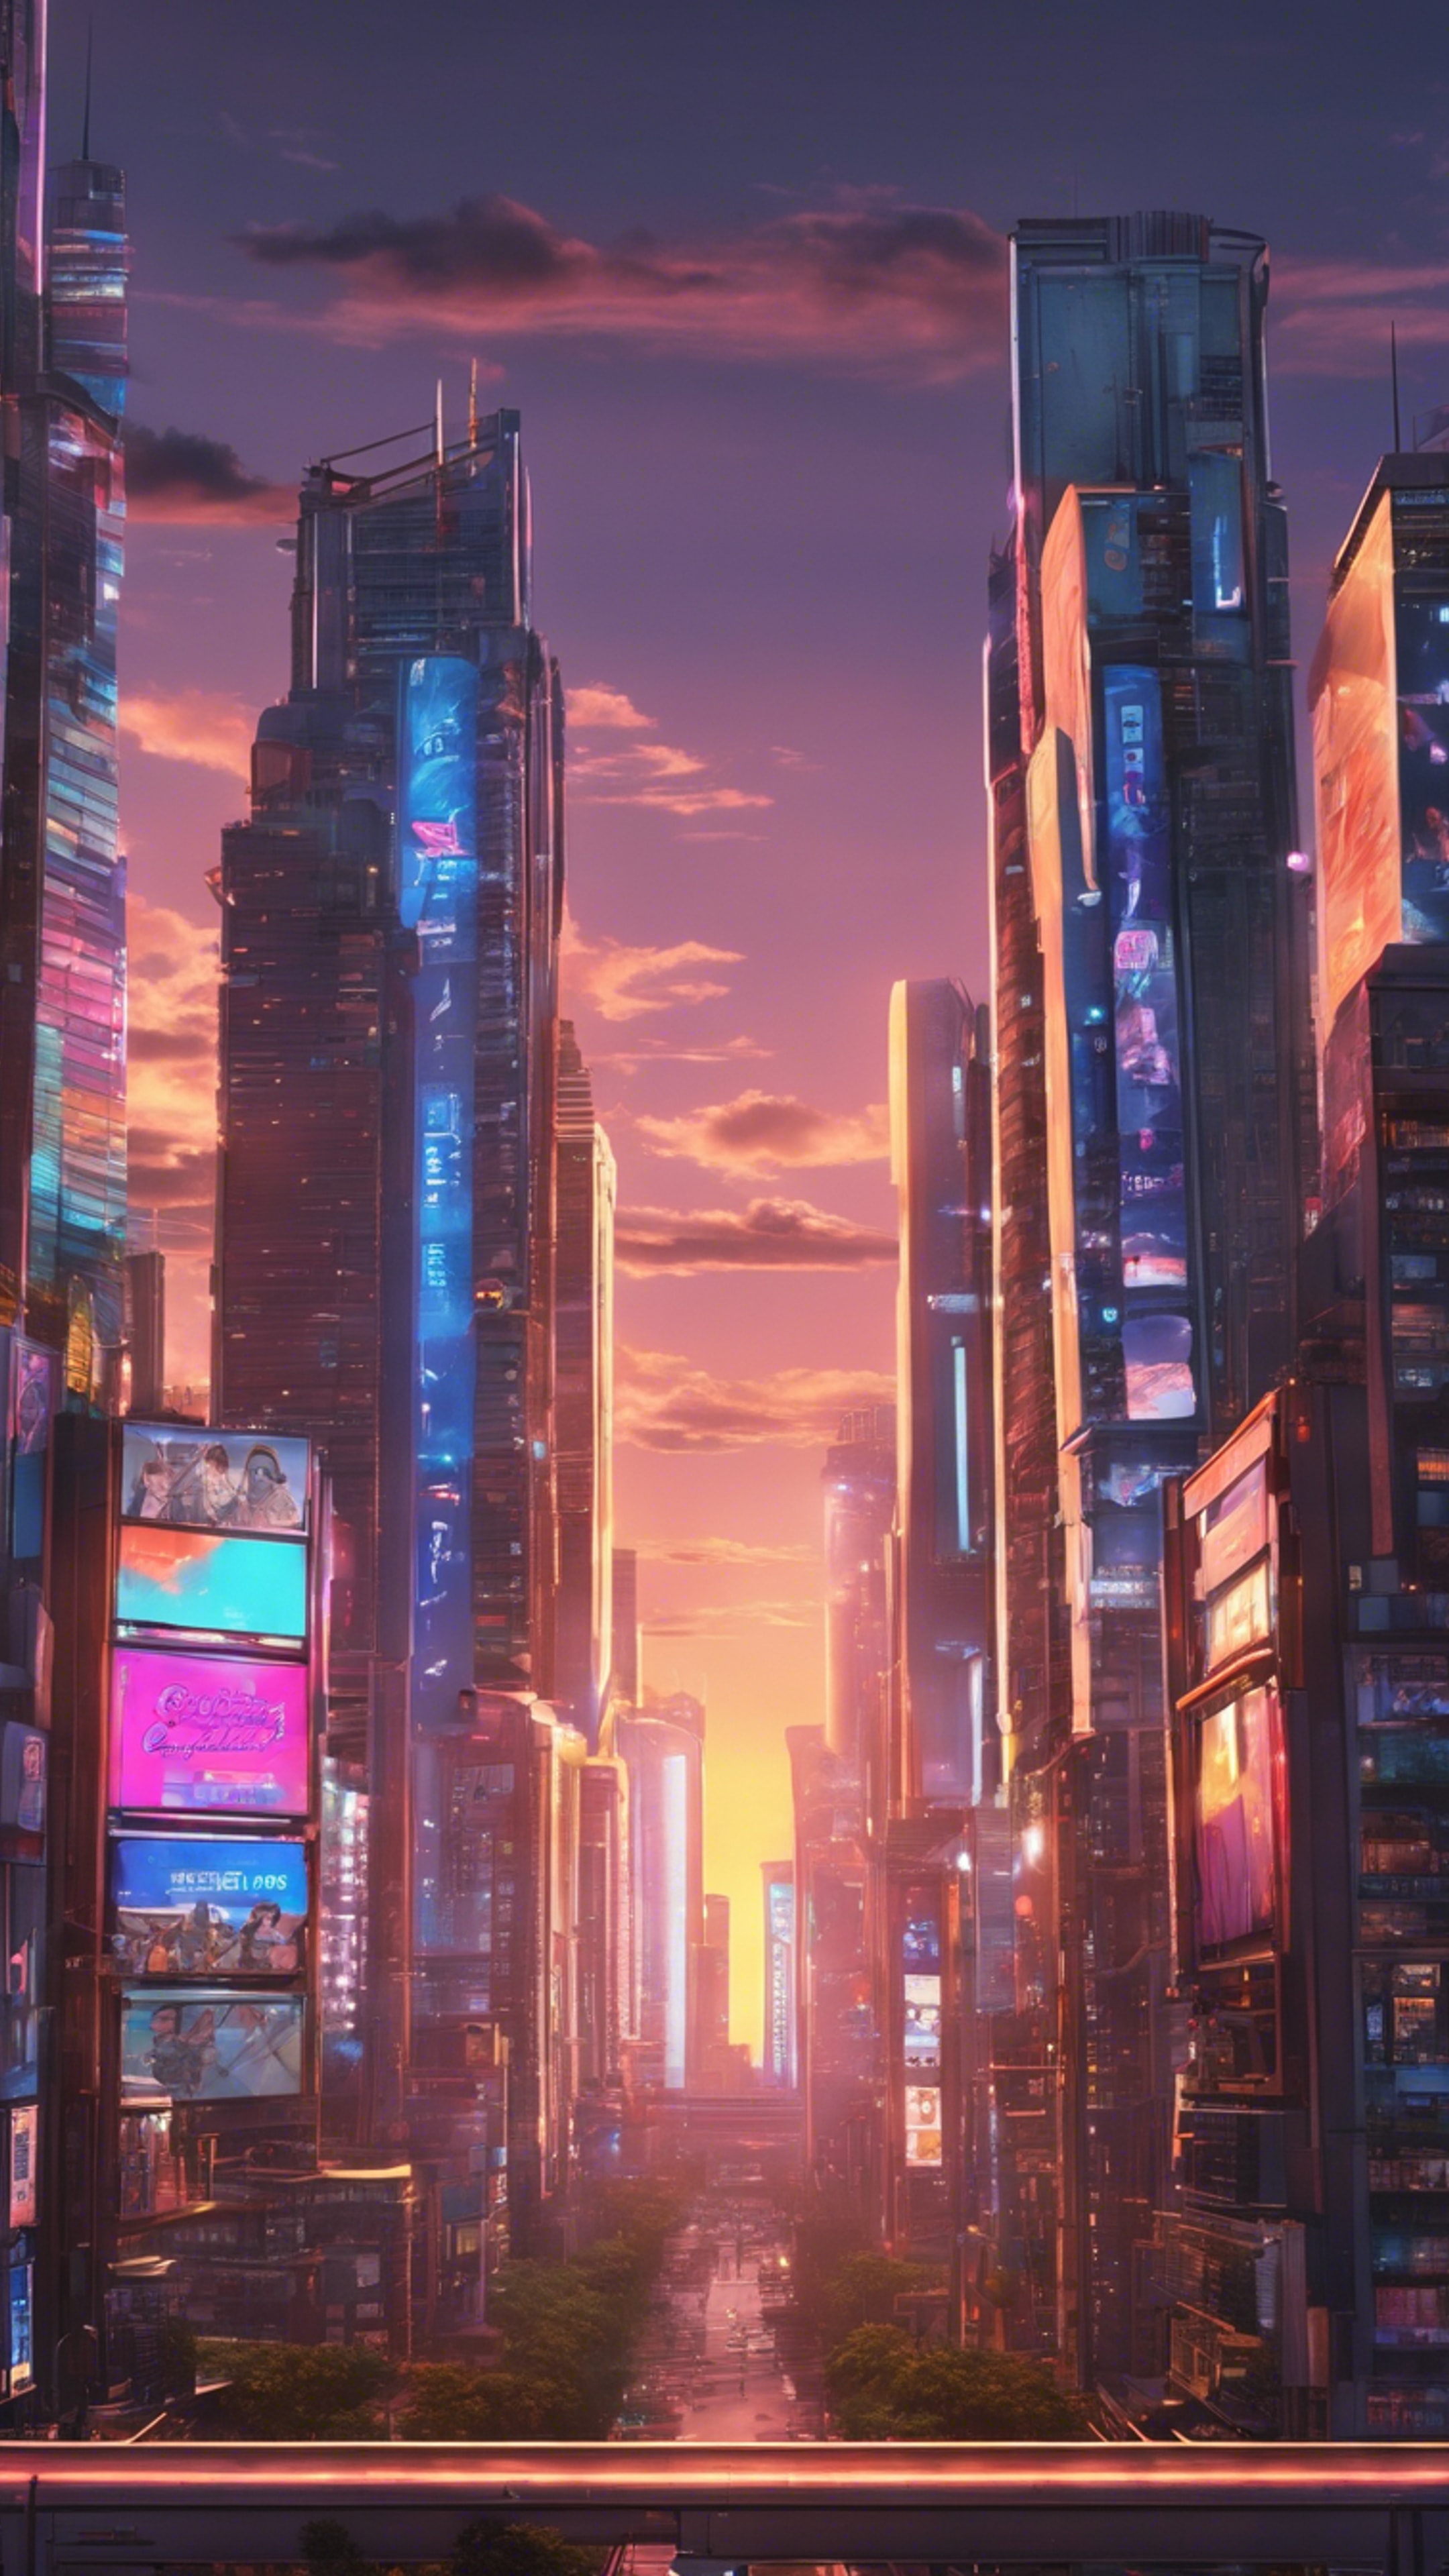 A cool anime-themed cityscape at sunset with towering skyscrapers and glowing neon billboards. Ταπετσαρία[63ed83801d984cce89ed]